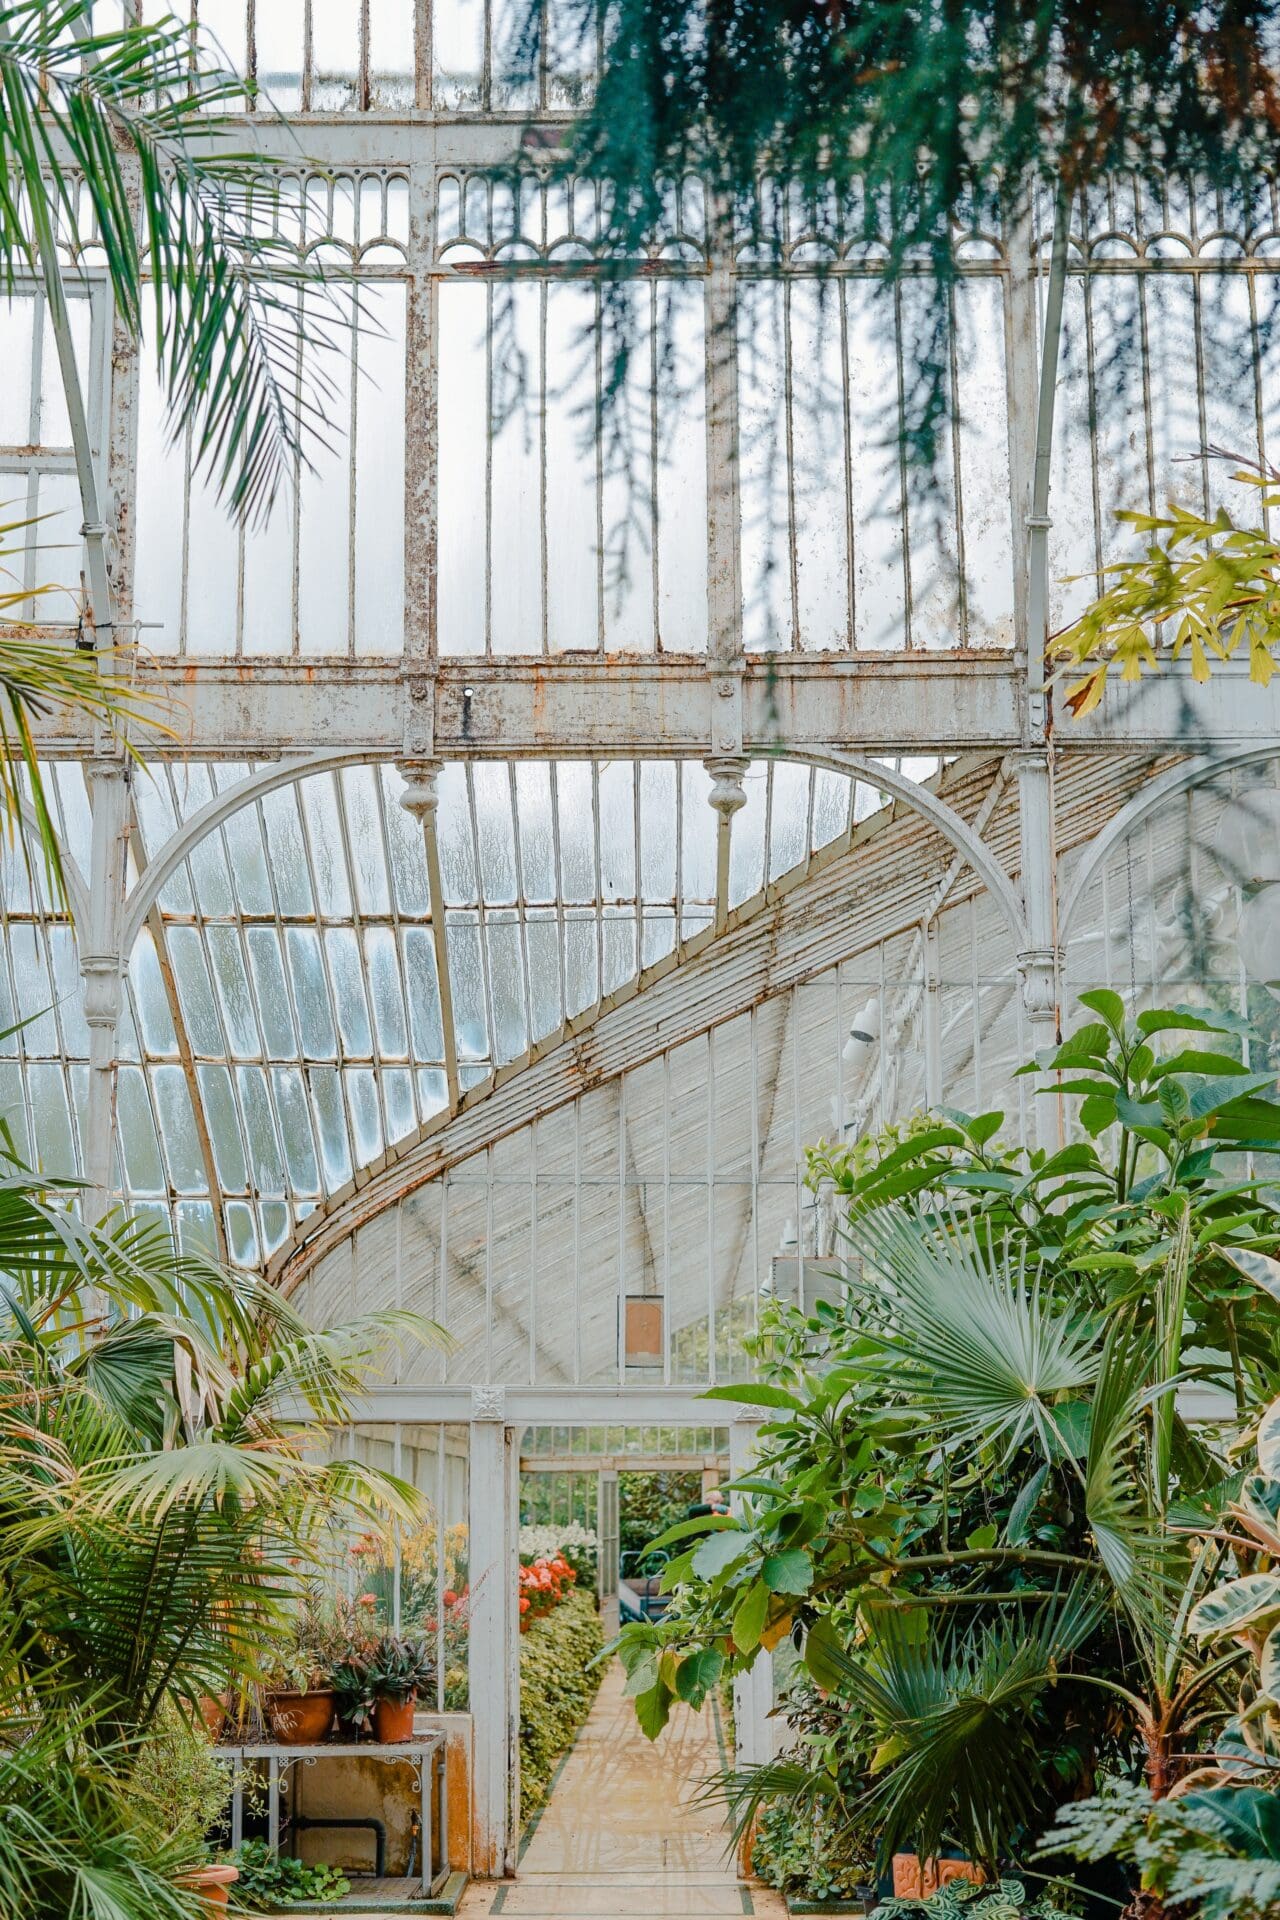 The best European cities for remote working | Inside a greenhouse at Belfast's Botanic Gardens, with white wrought-iron details and dangling plants